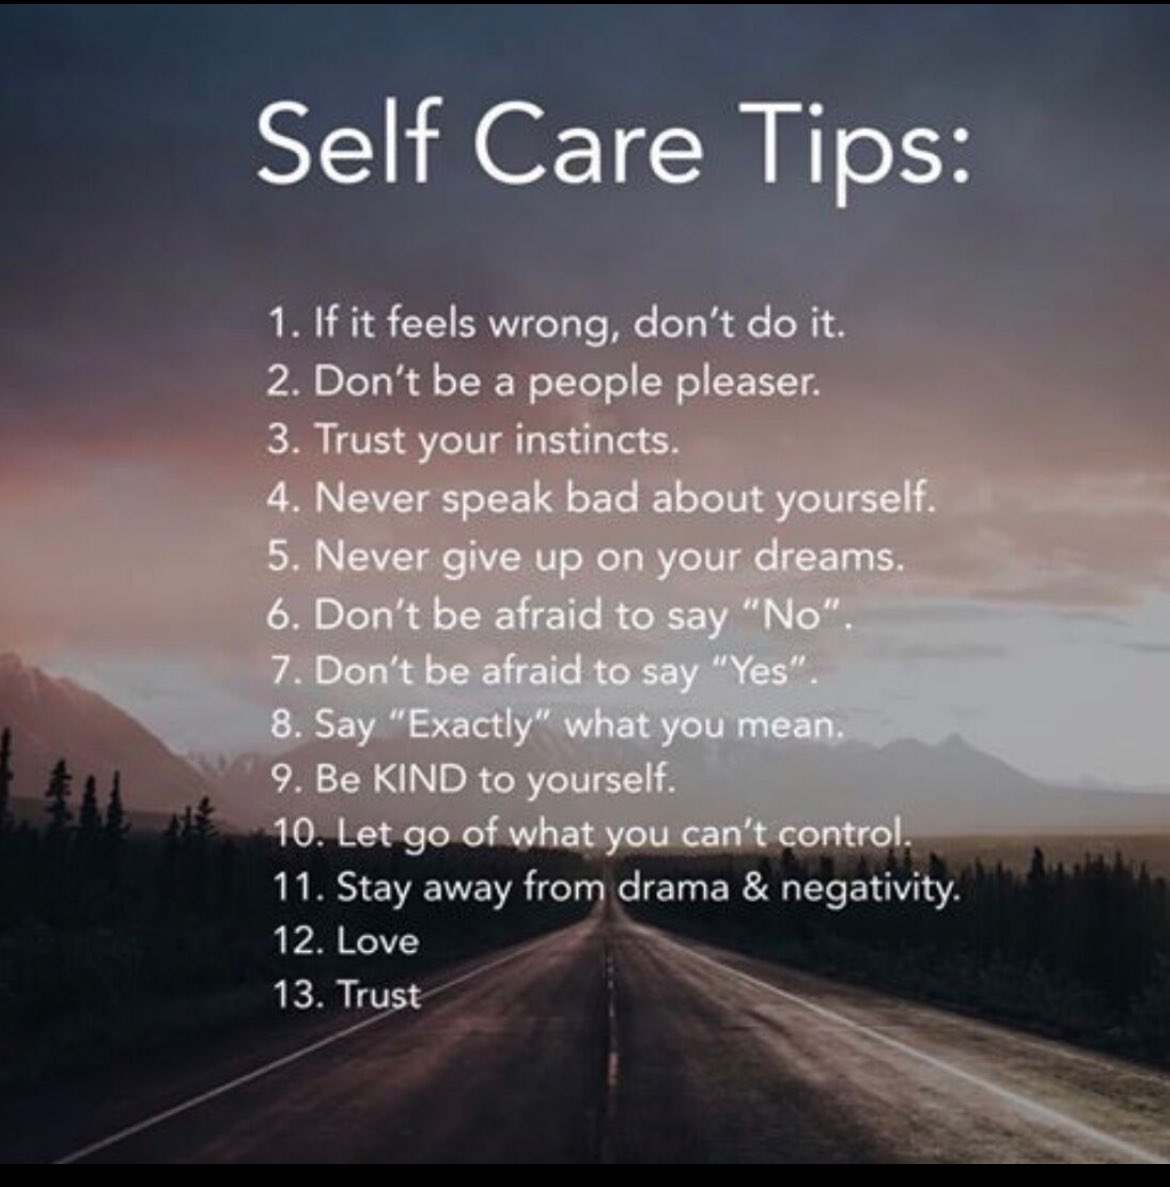 We could all do with a bit of self care✨